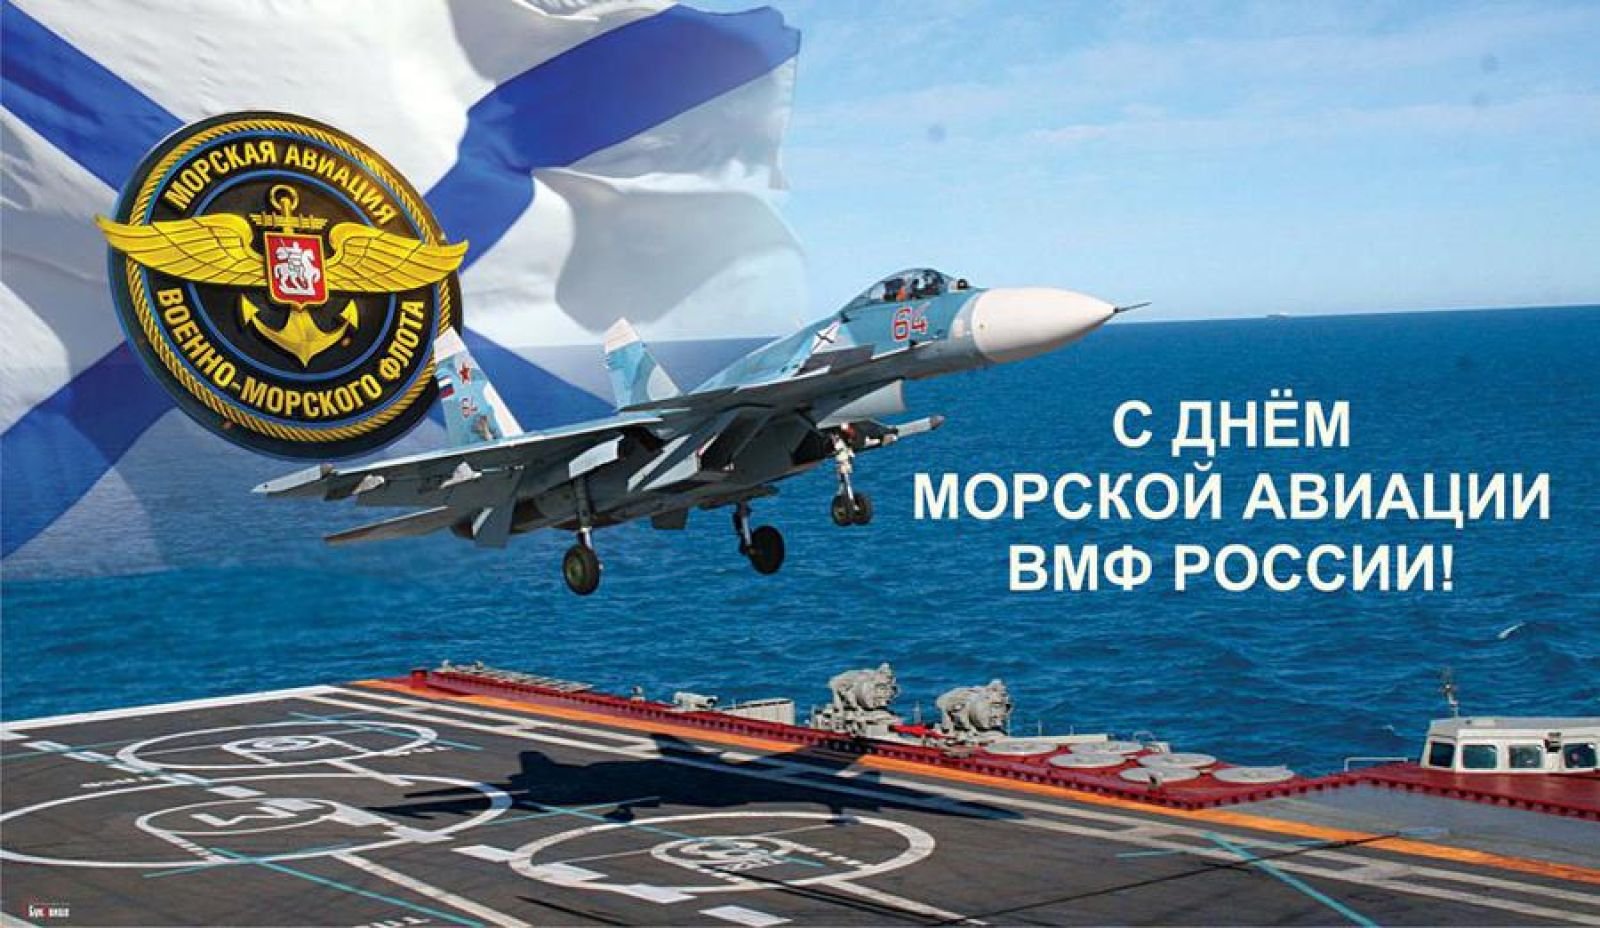 Free postcard Russian navy aviation day